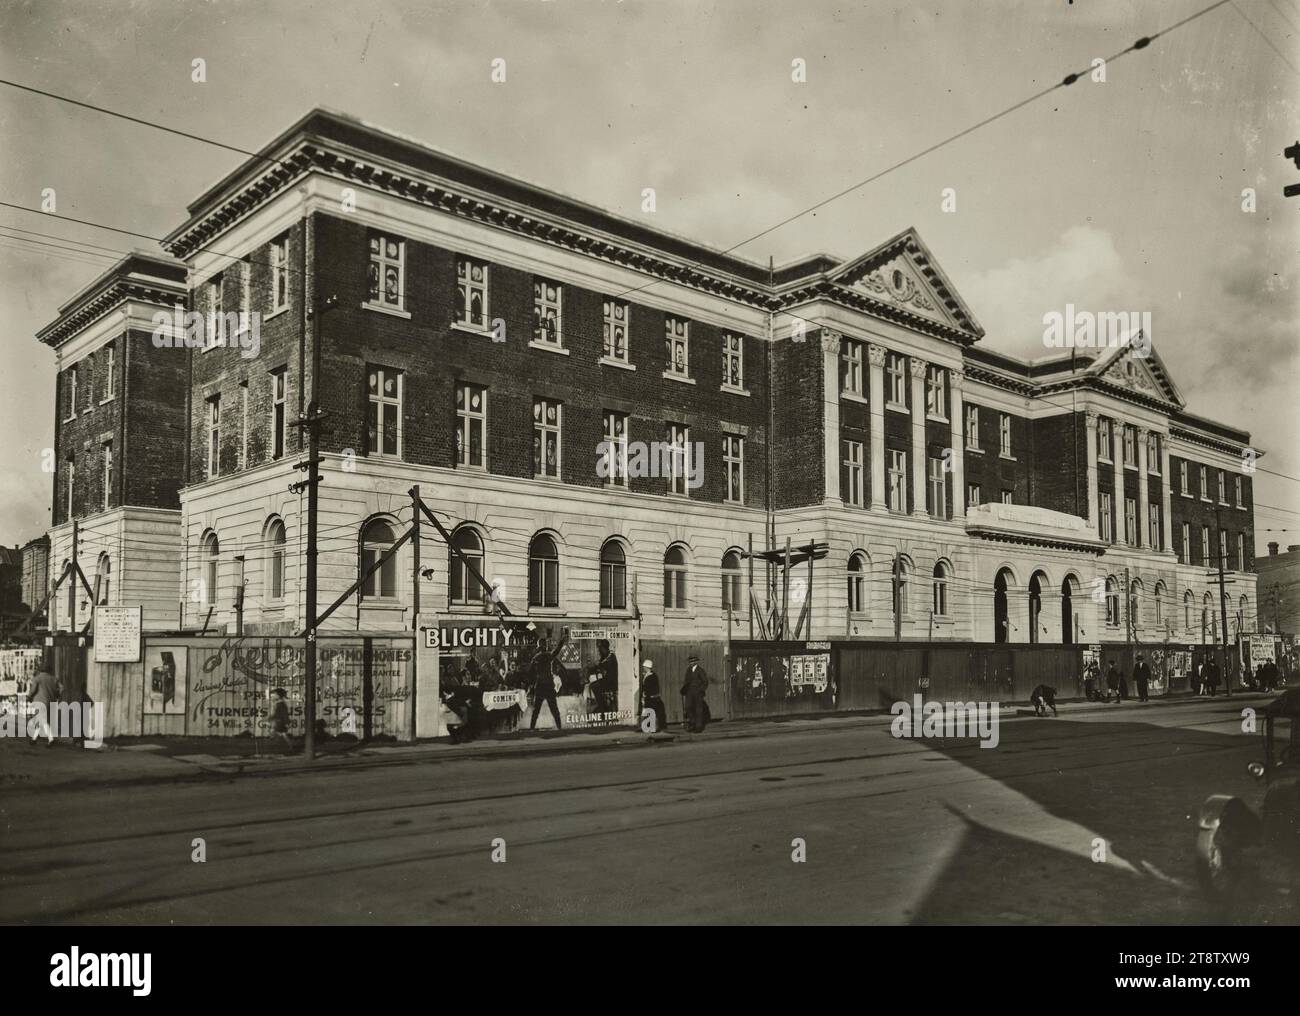 Wellington, New Zealand Public Hospital building near completion, Adelaide Road, Newtown, CA 24 agosto 1927 Foto Stock